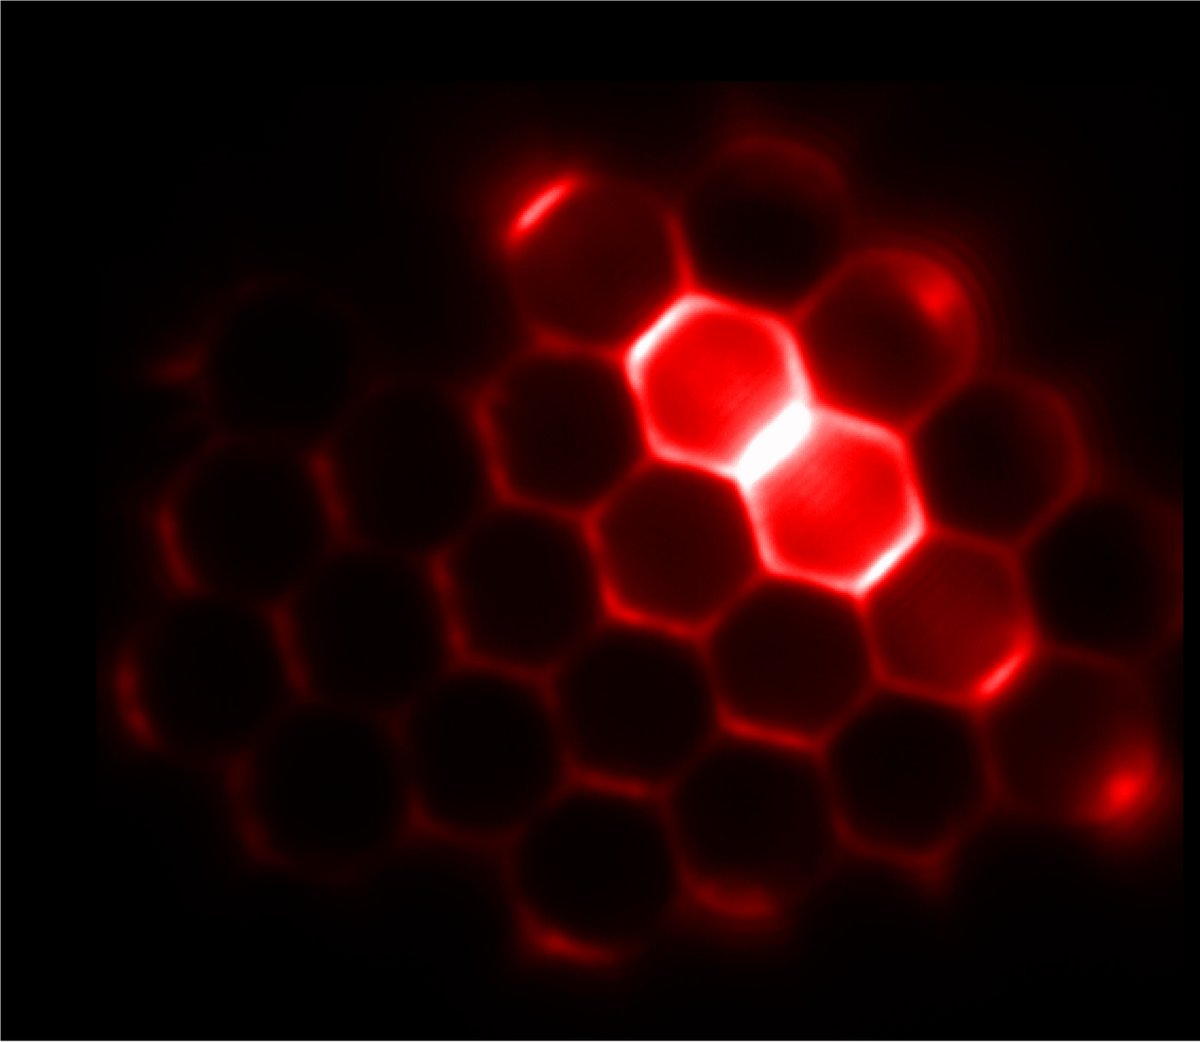 Image - A wide-field image showing the light emitted by microlasers in a self-assembled 2-D array. (Credit: Angel Fernandez-Bravo)